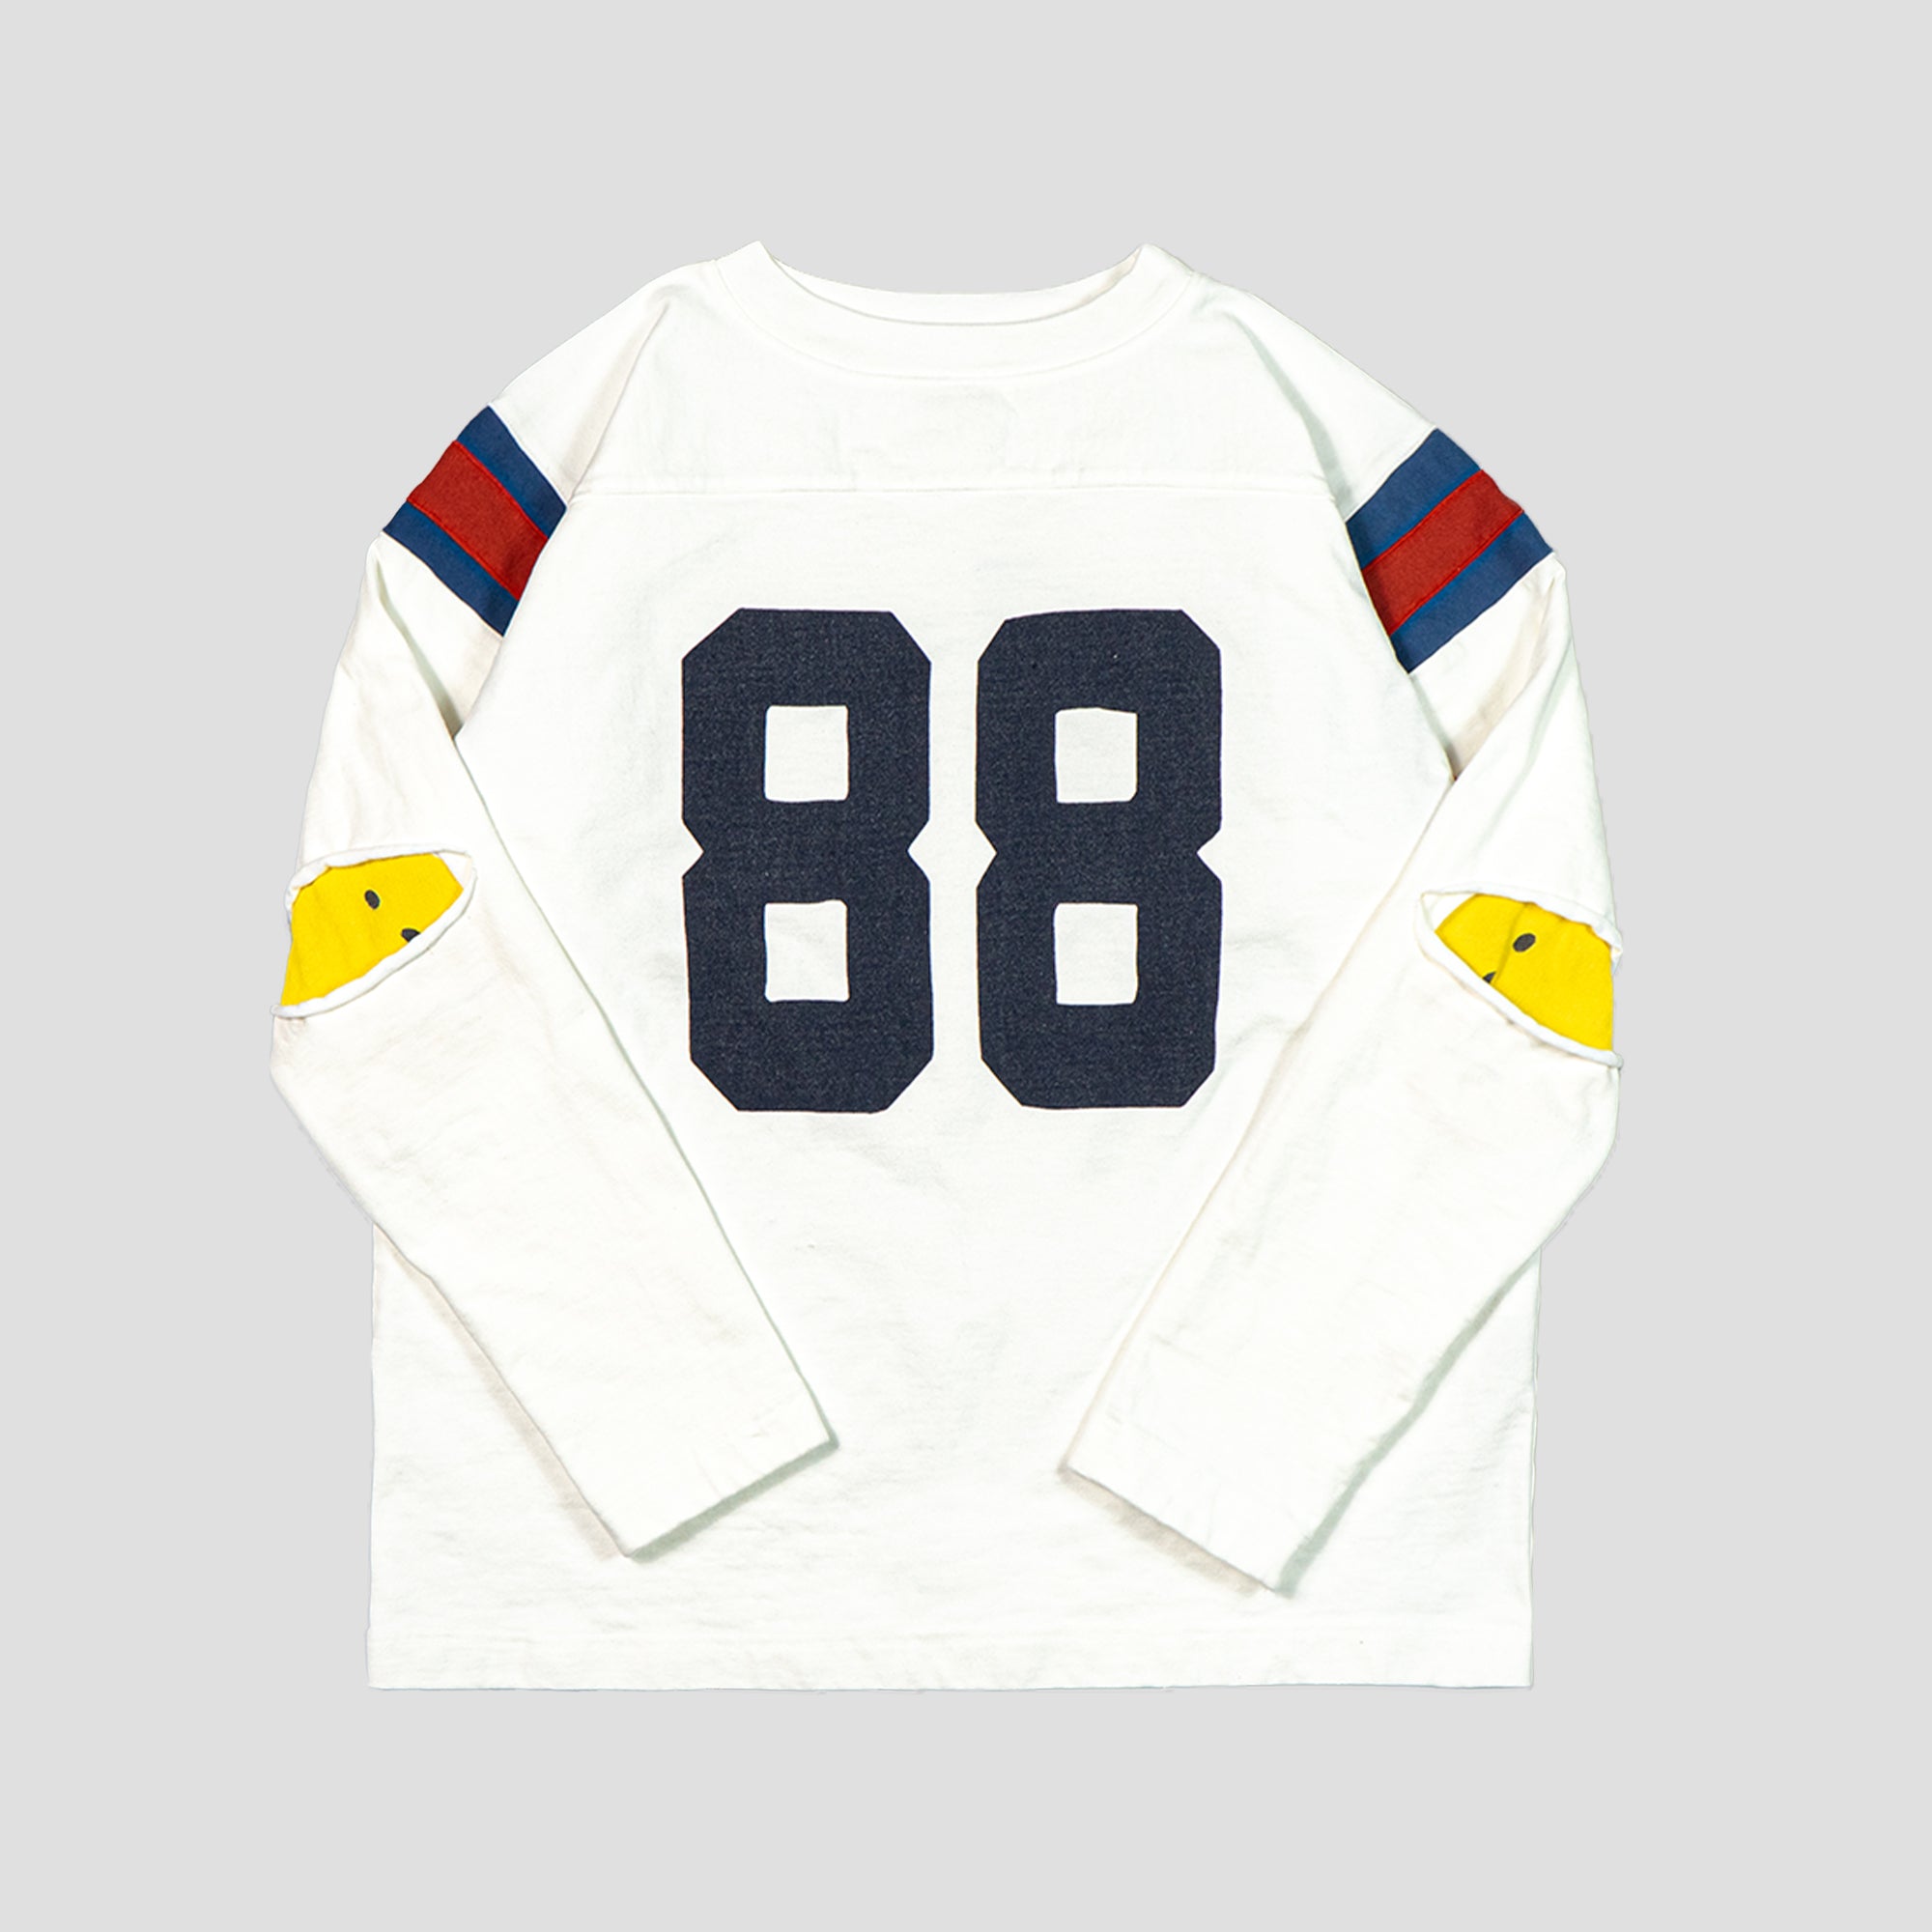 DENSED JERSEY ELBOW RIP FOOTBALL T-SHIRTS (88)